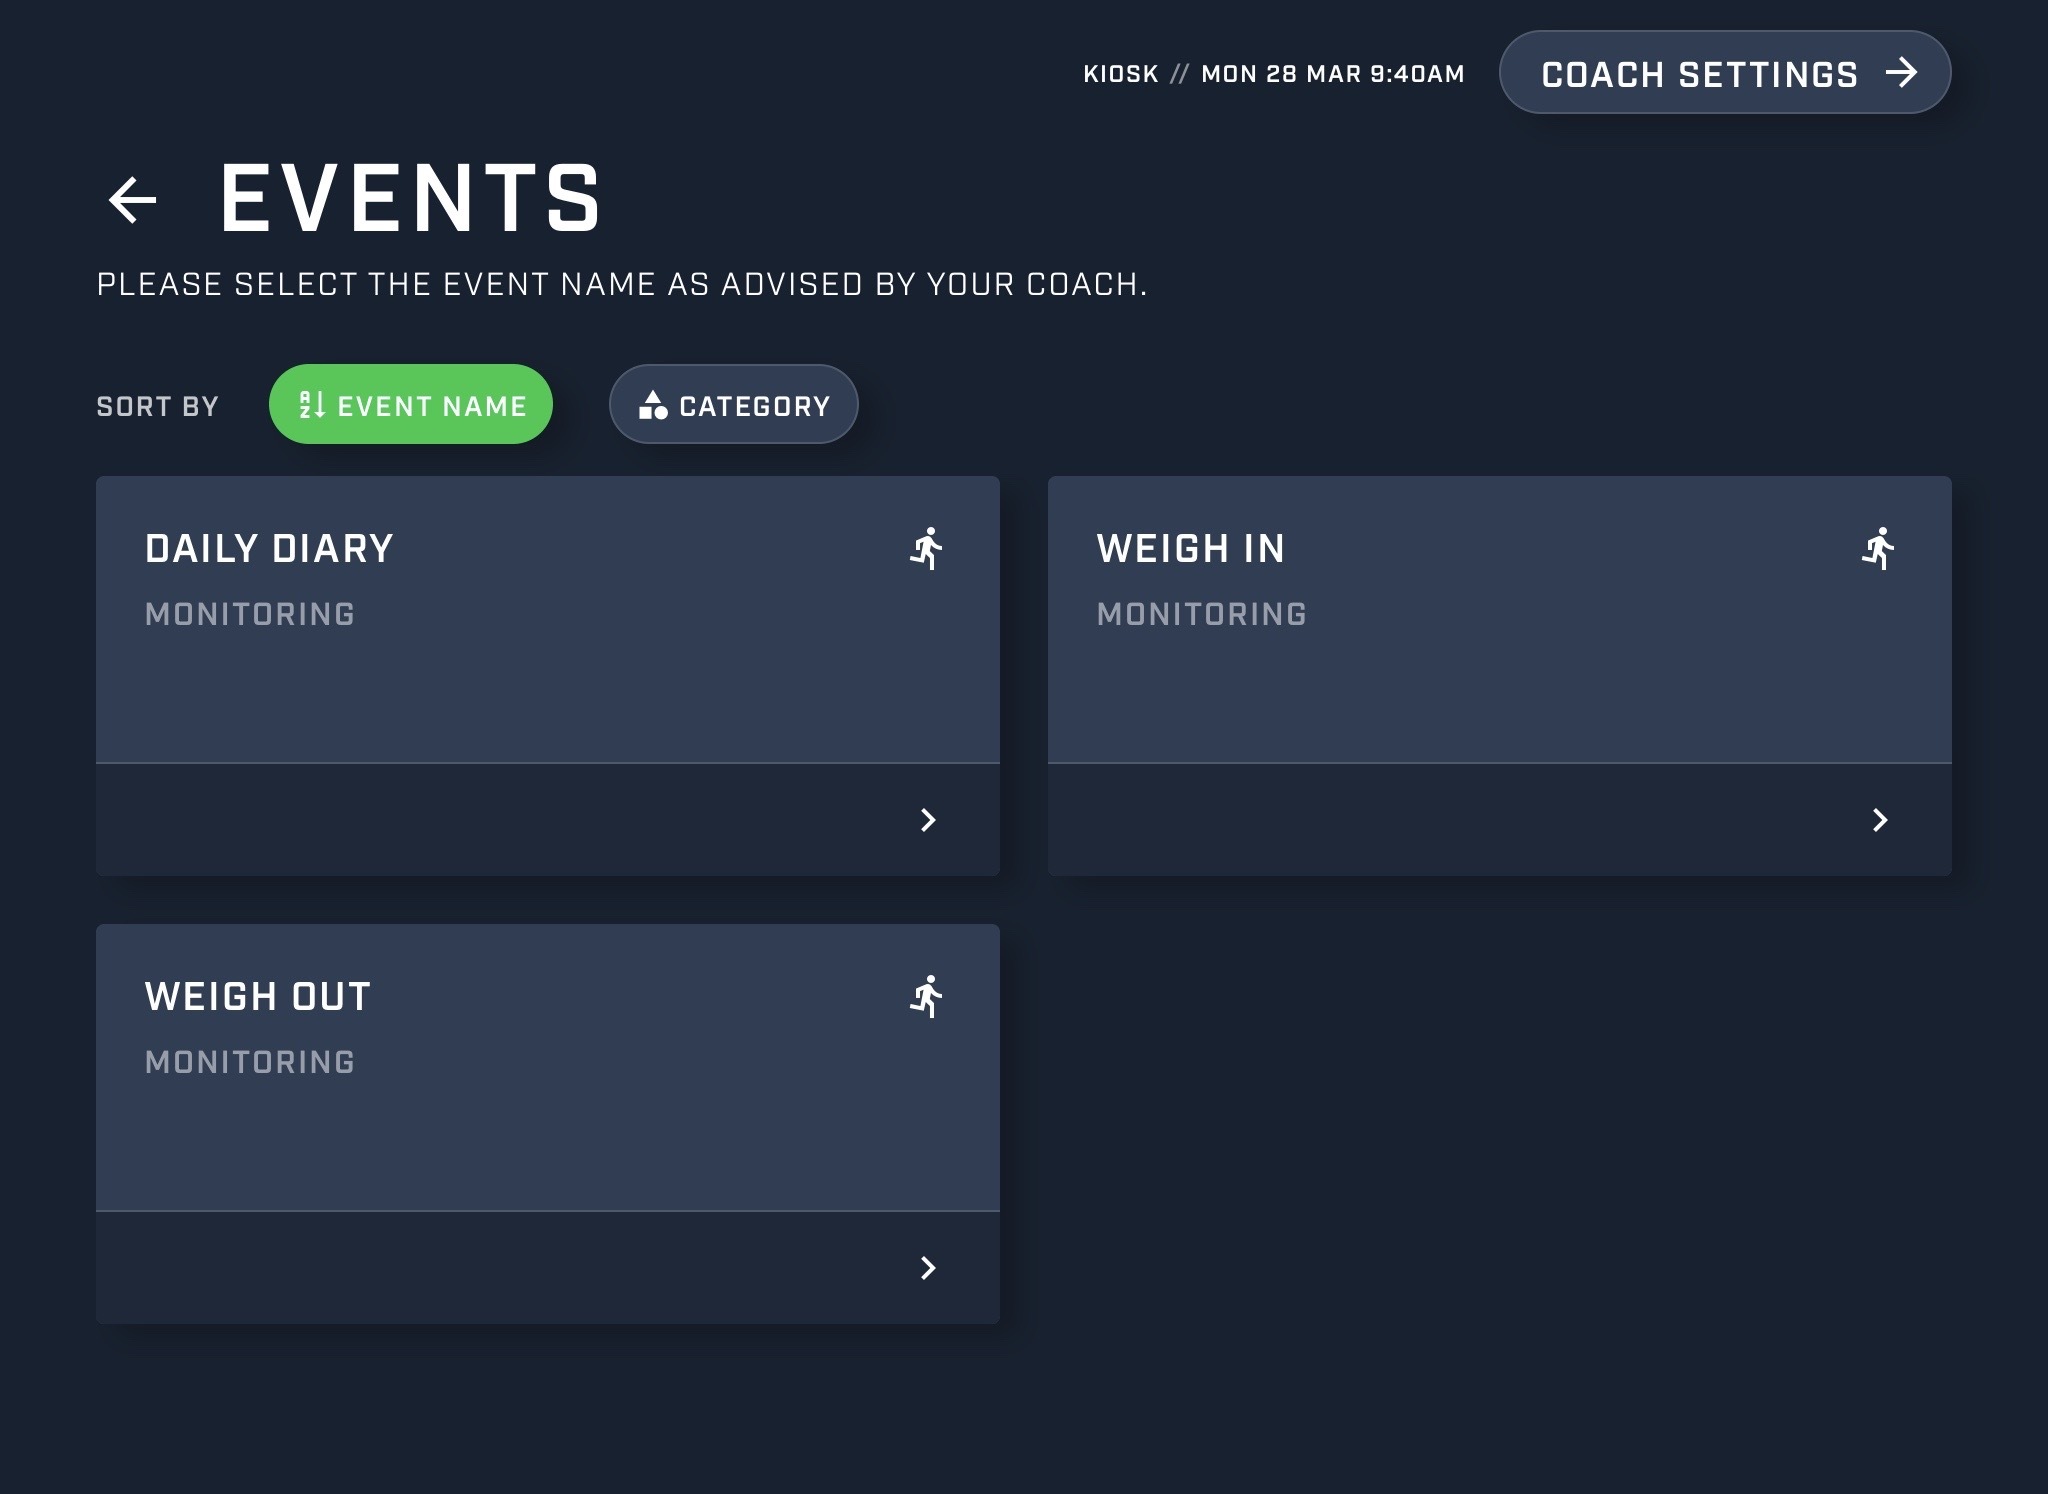 A screenshot showing an example of the event form selection screen for athletes in the Smartabase Kiosk app.